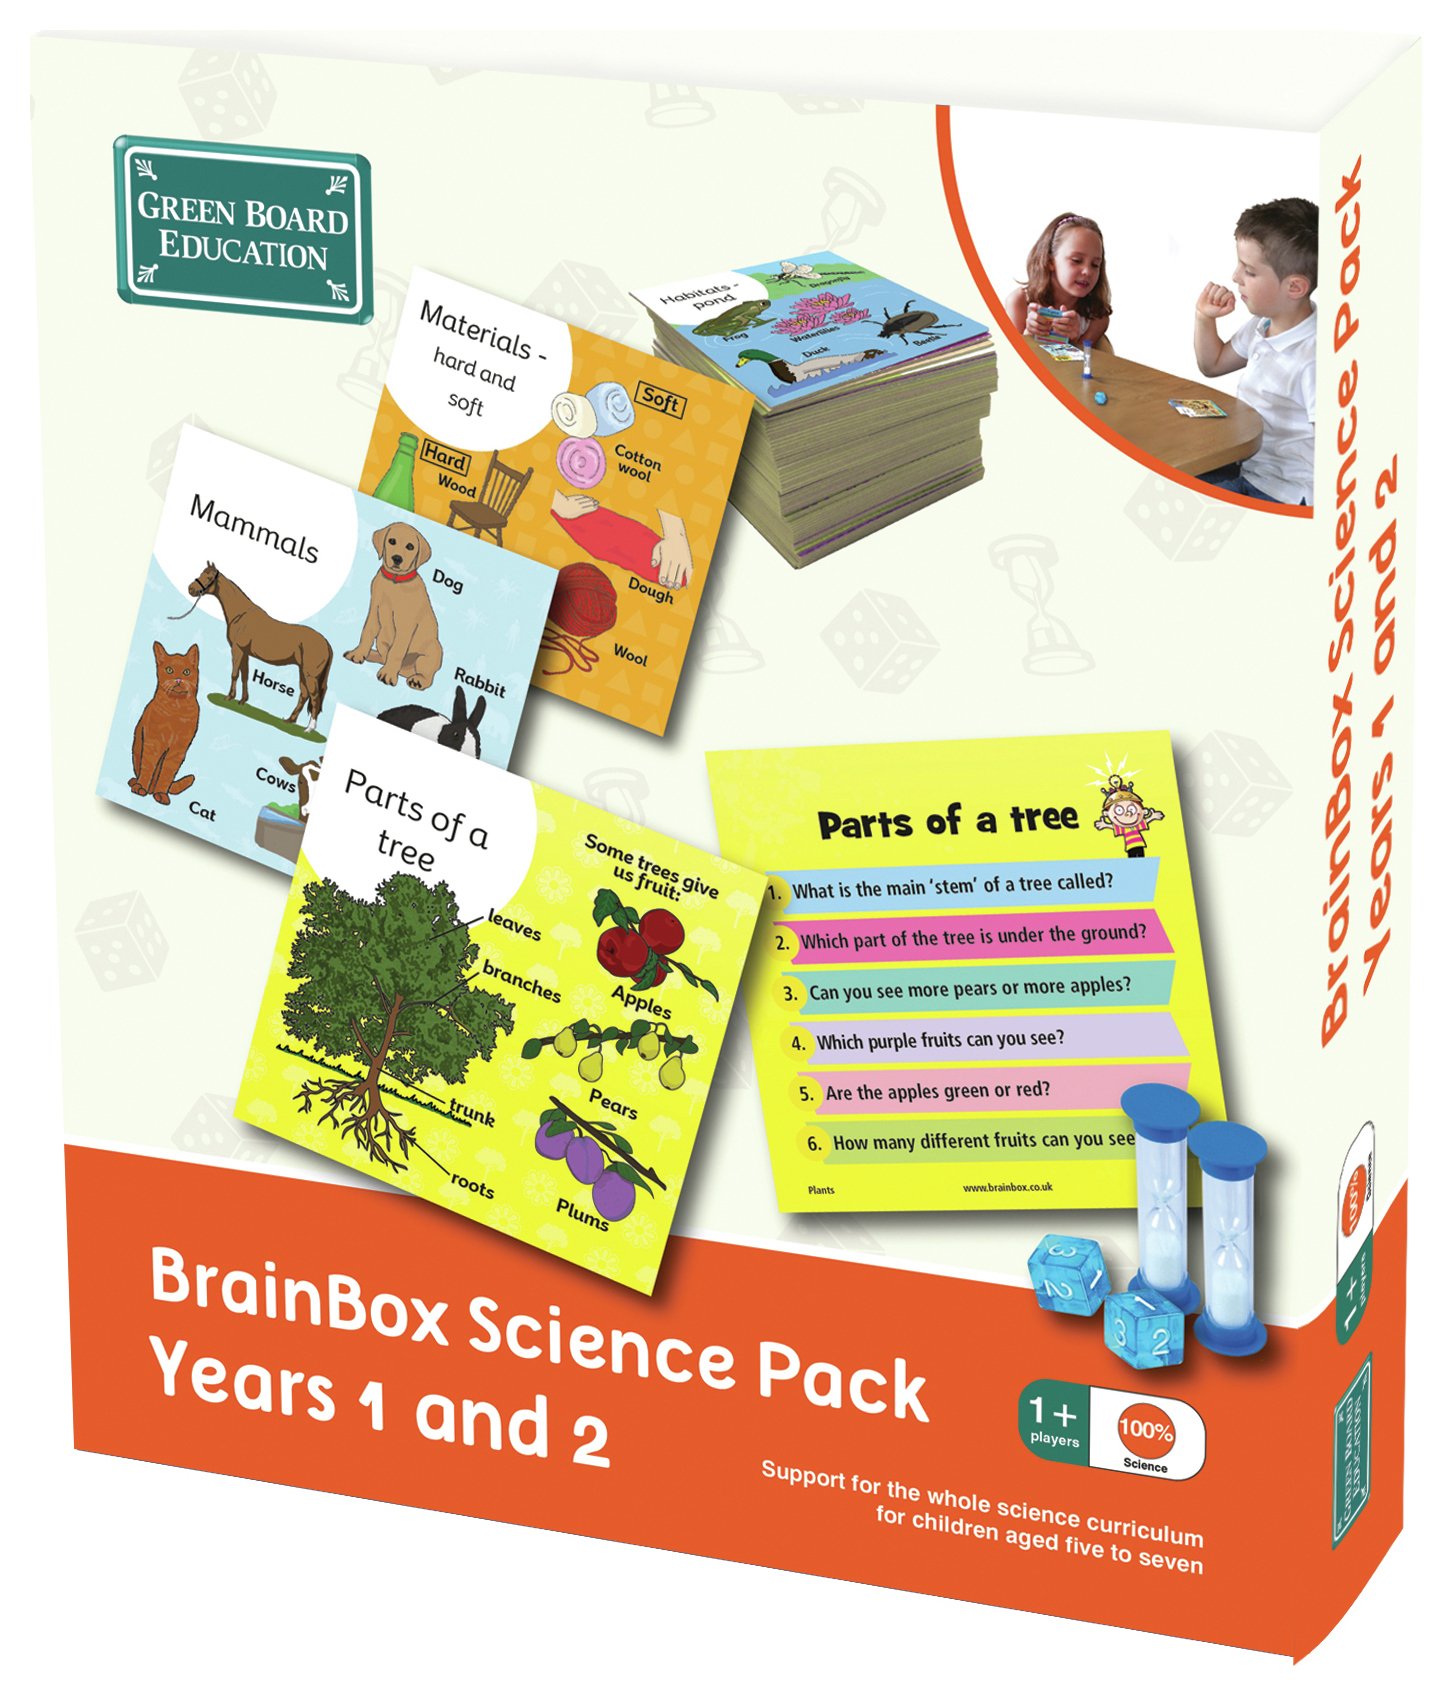 Brainbox Science Pack - Years 1 and 2